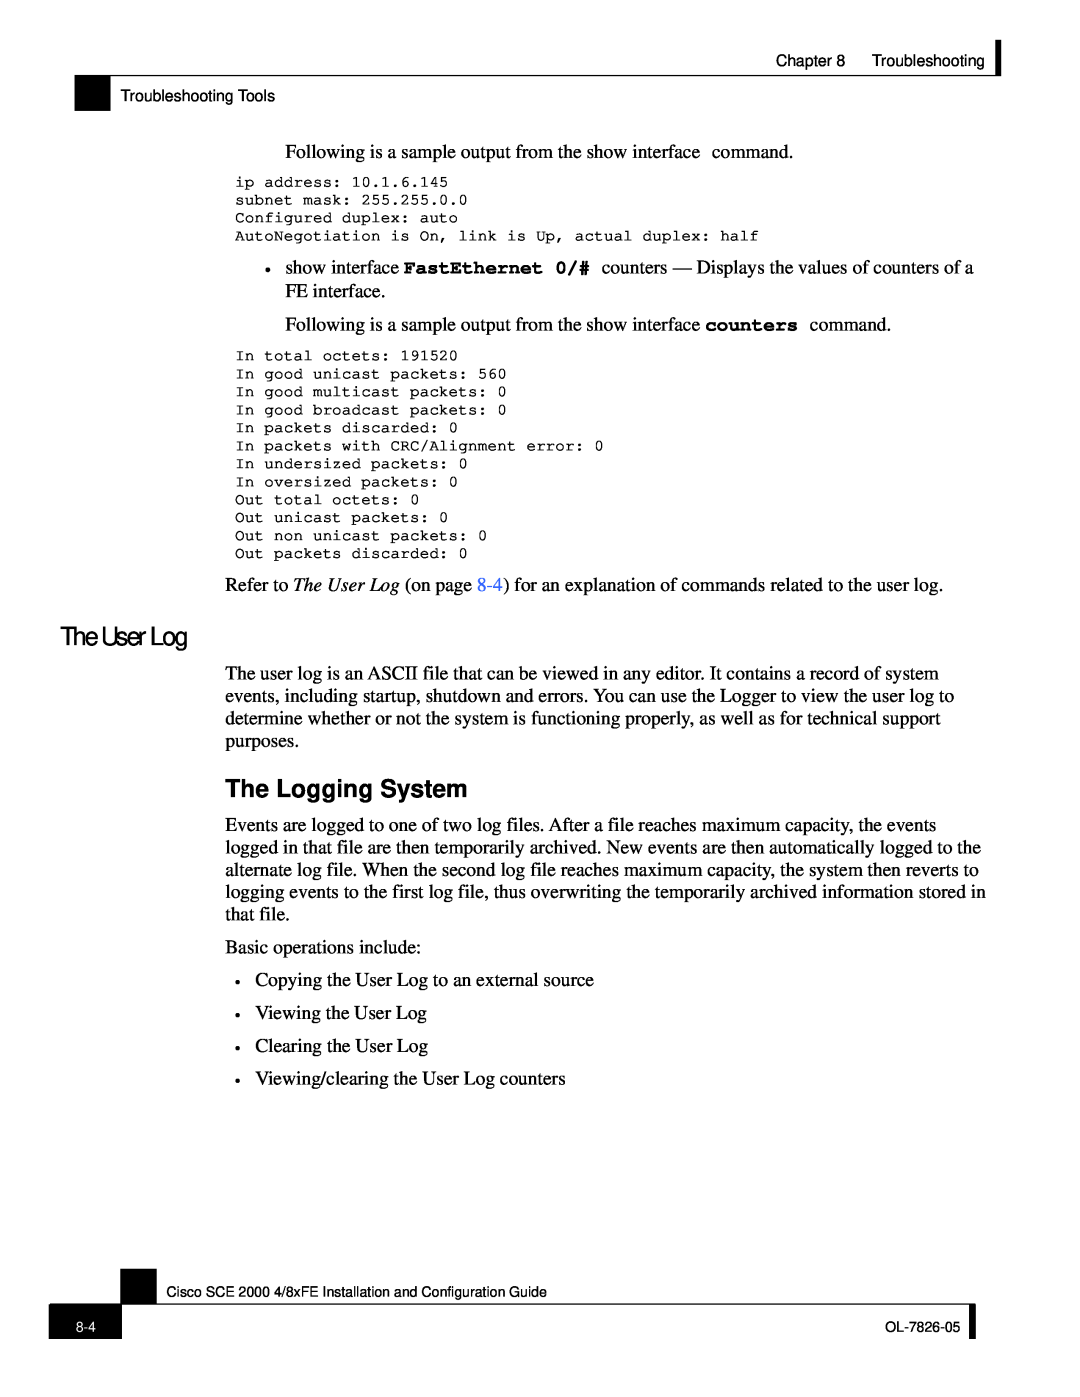 Cisco Systems SCE 2000 4/8xFE manual The User Log, The Logging System 